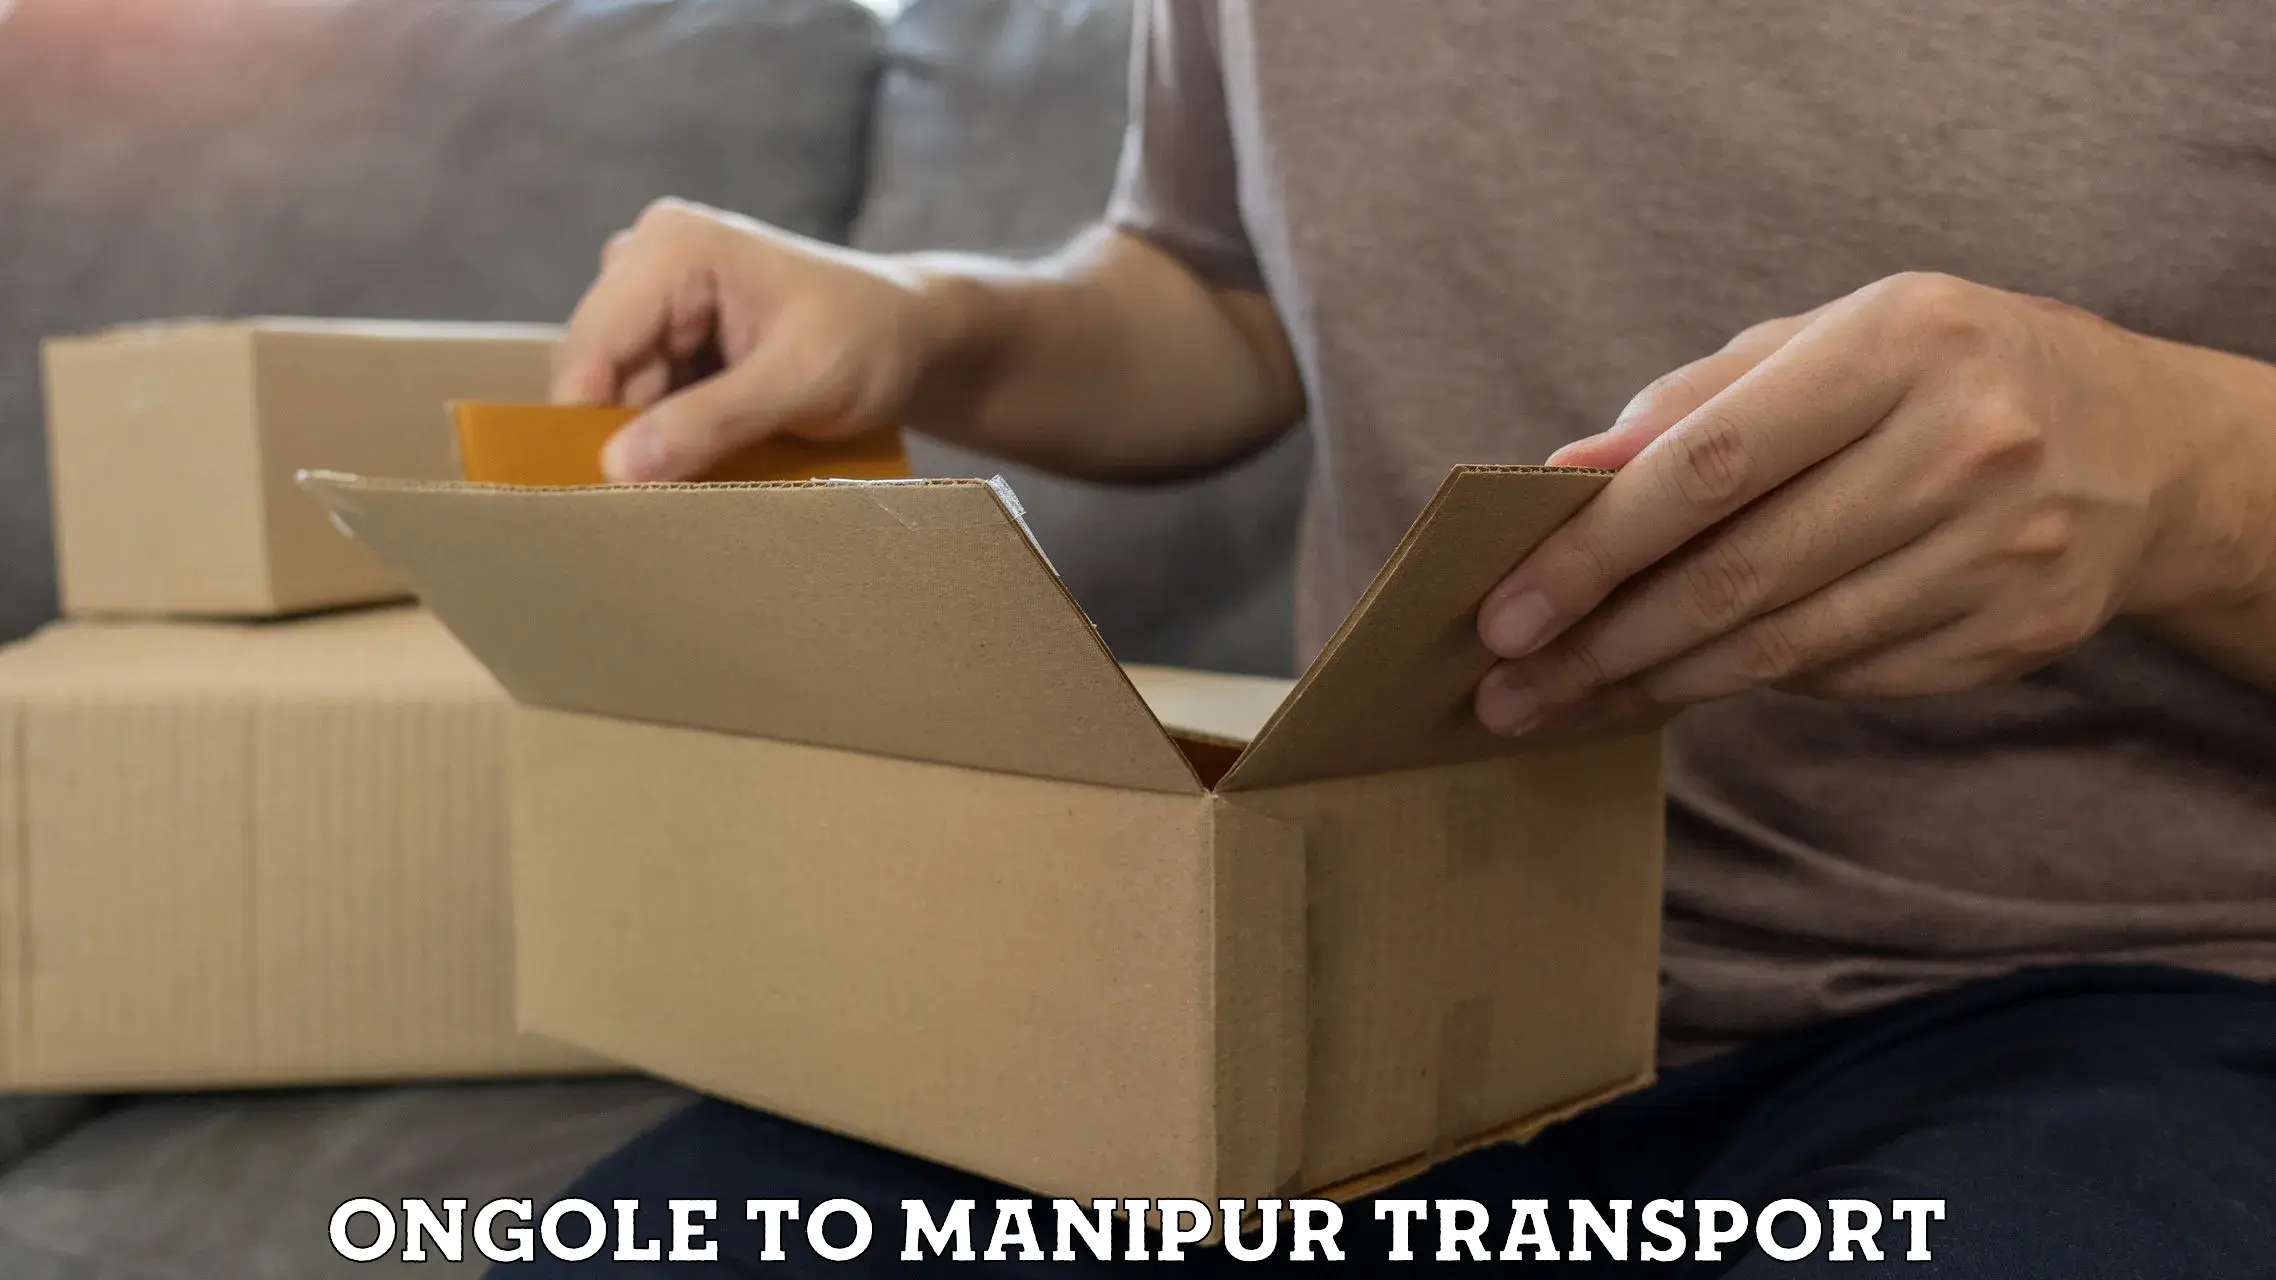 Pick up transport service Ongole to Manipur